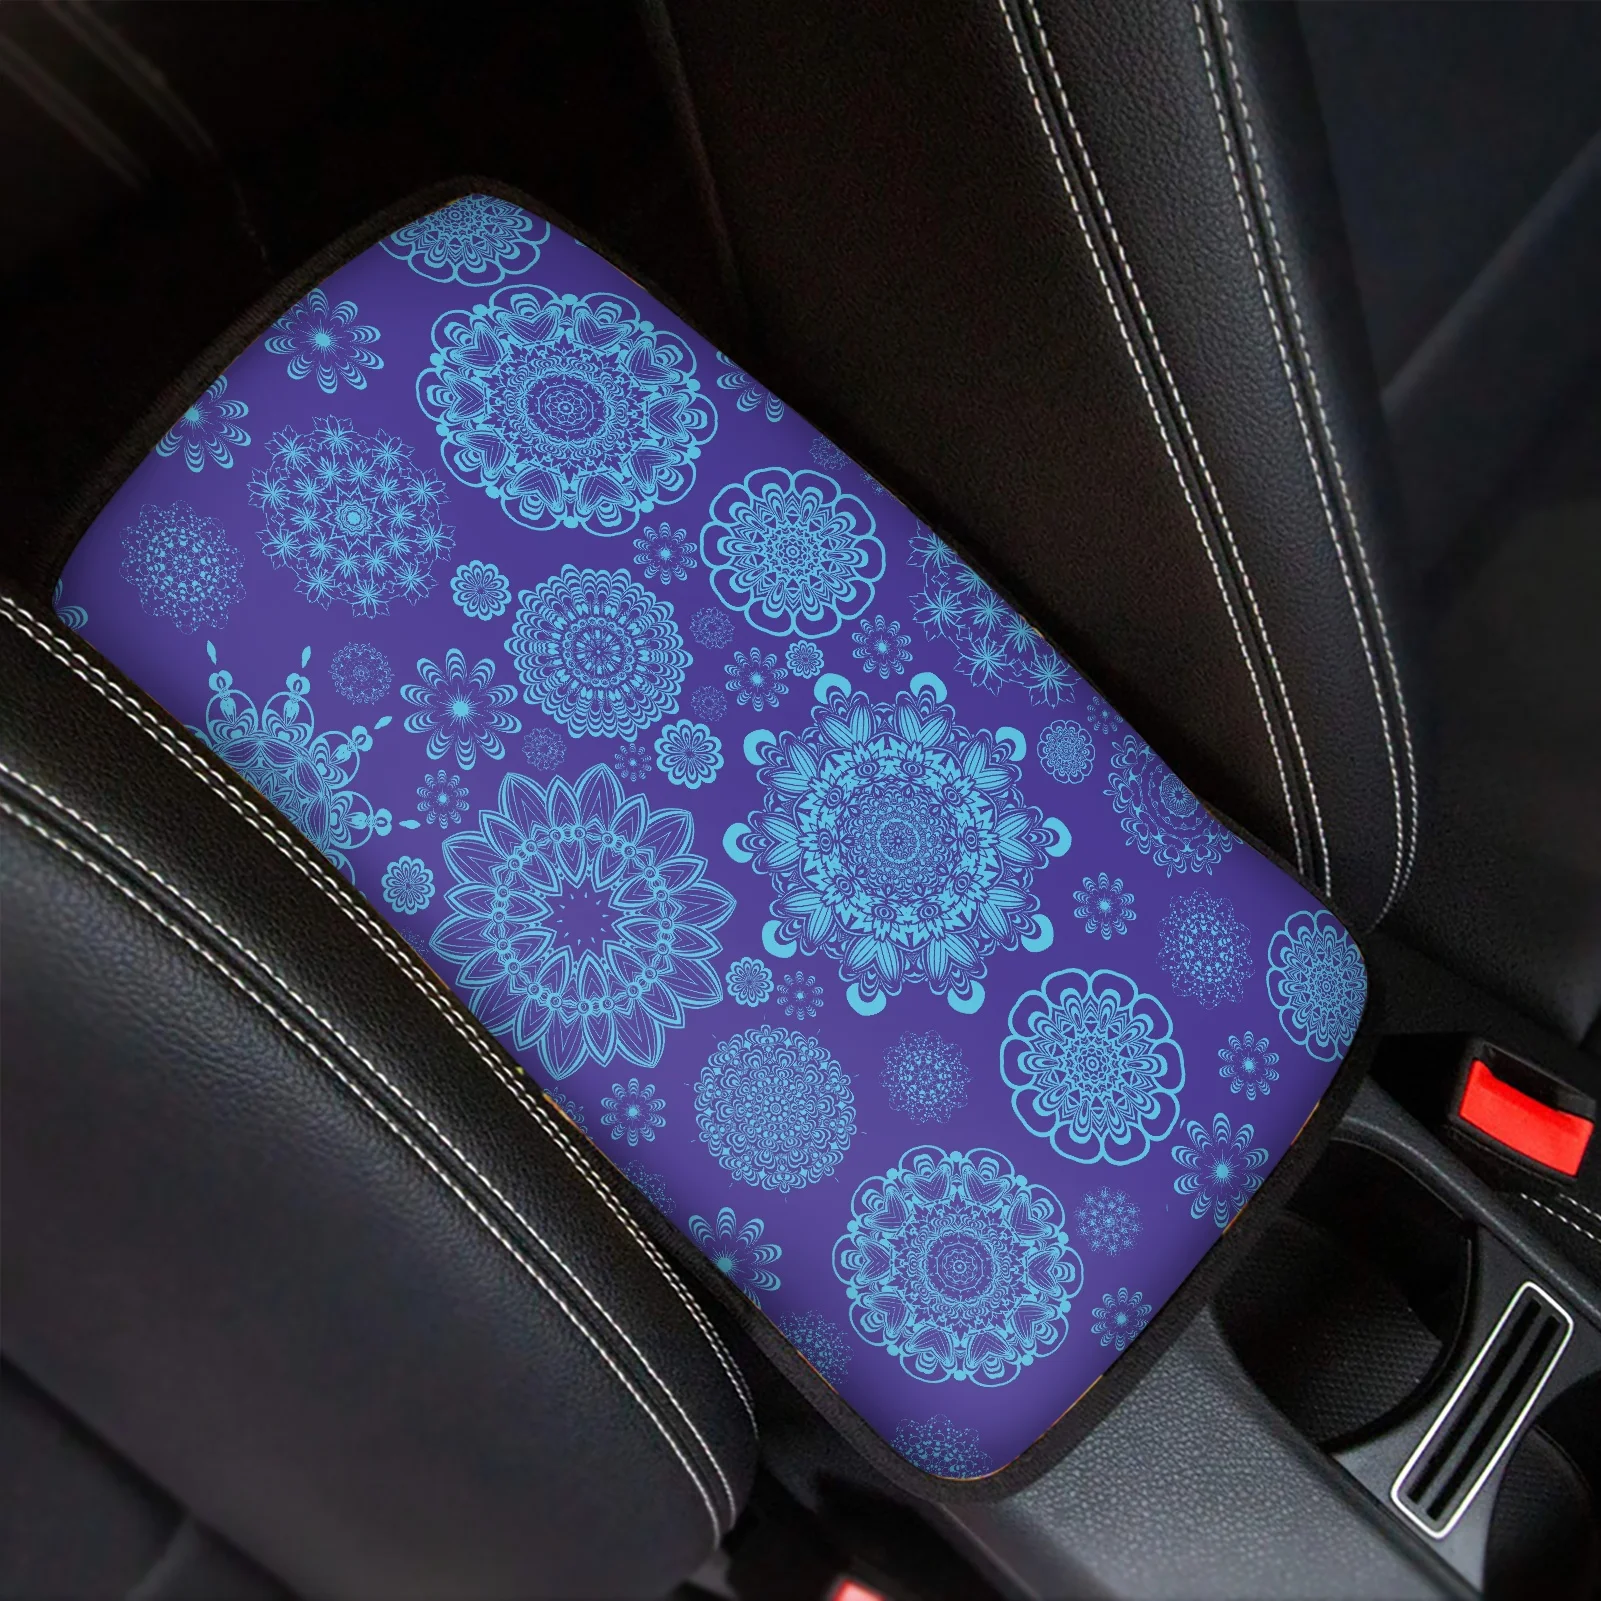 Xinind Mandala Auto Center Console Lid Cover Protect Console Cover Armrest Pads Cushion Washable Car Armrest Seat Box Protector Universal Fit 